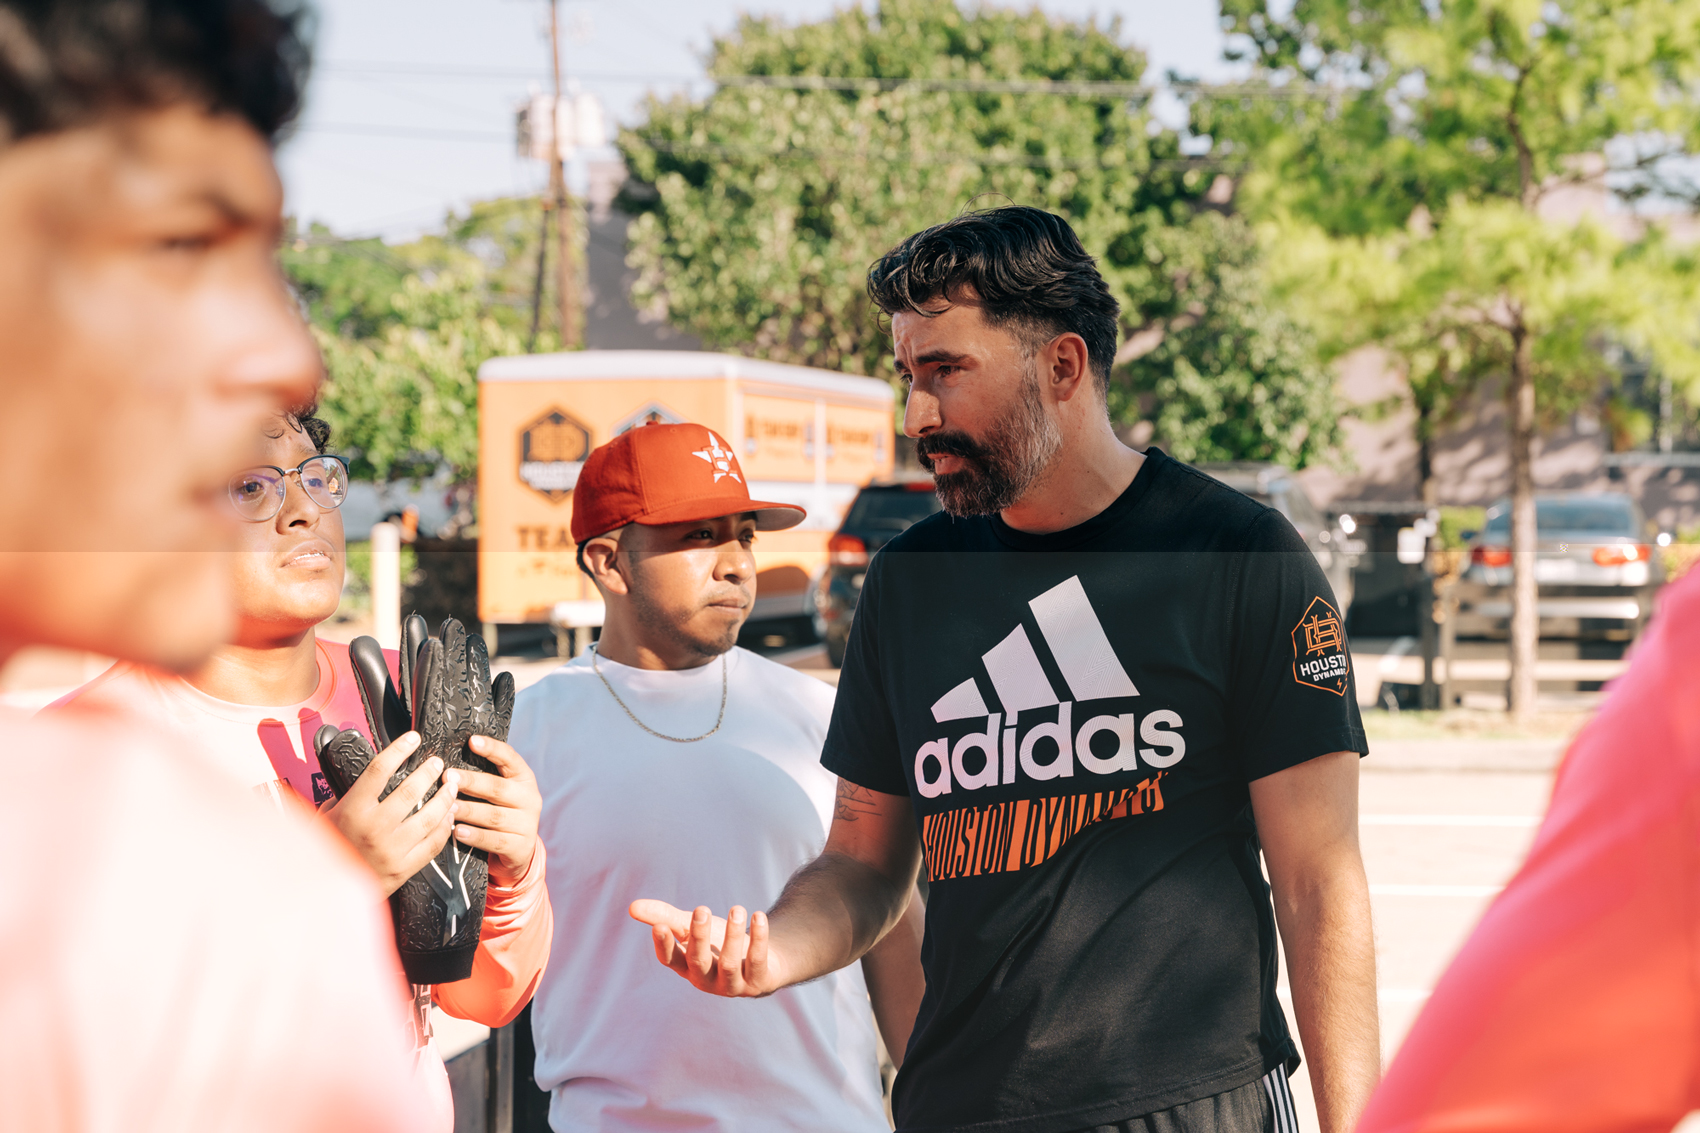 Juan Vega, a Houstonian who had to quit his job with the Dynamo because his status changed through the DACA program, gives encouragement to a soccer team on Saturday, Sept. 30, 2023, in Houston.